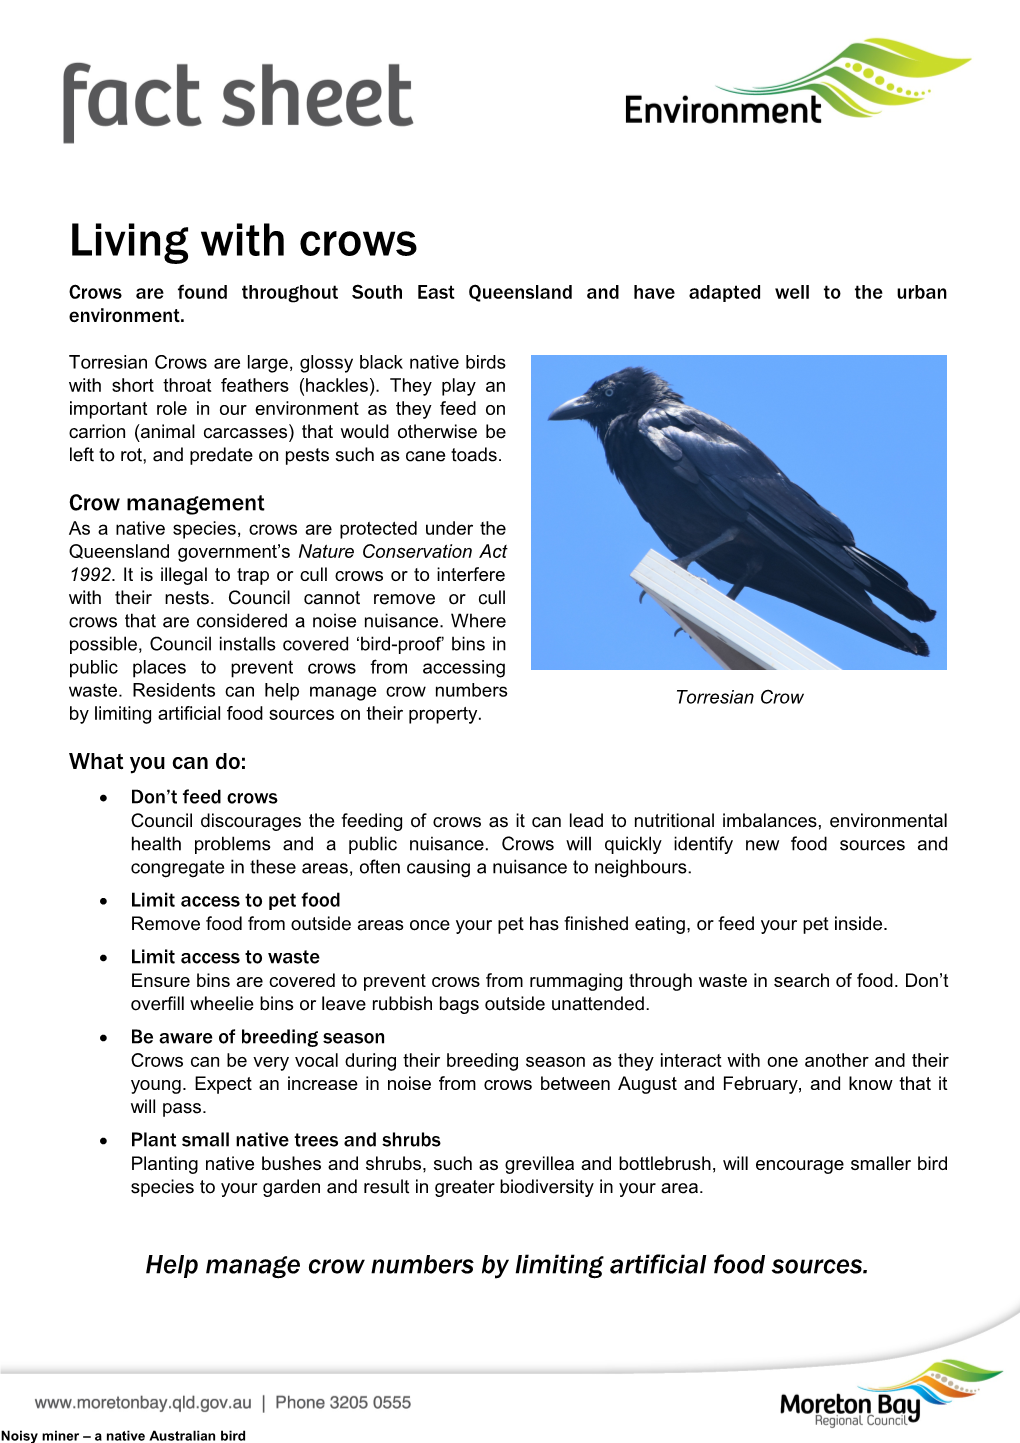 Living with Crows